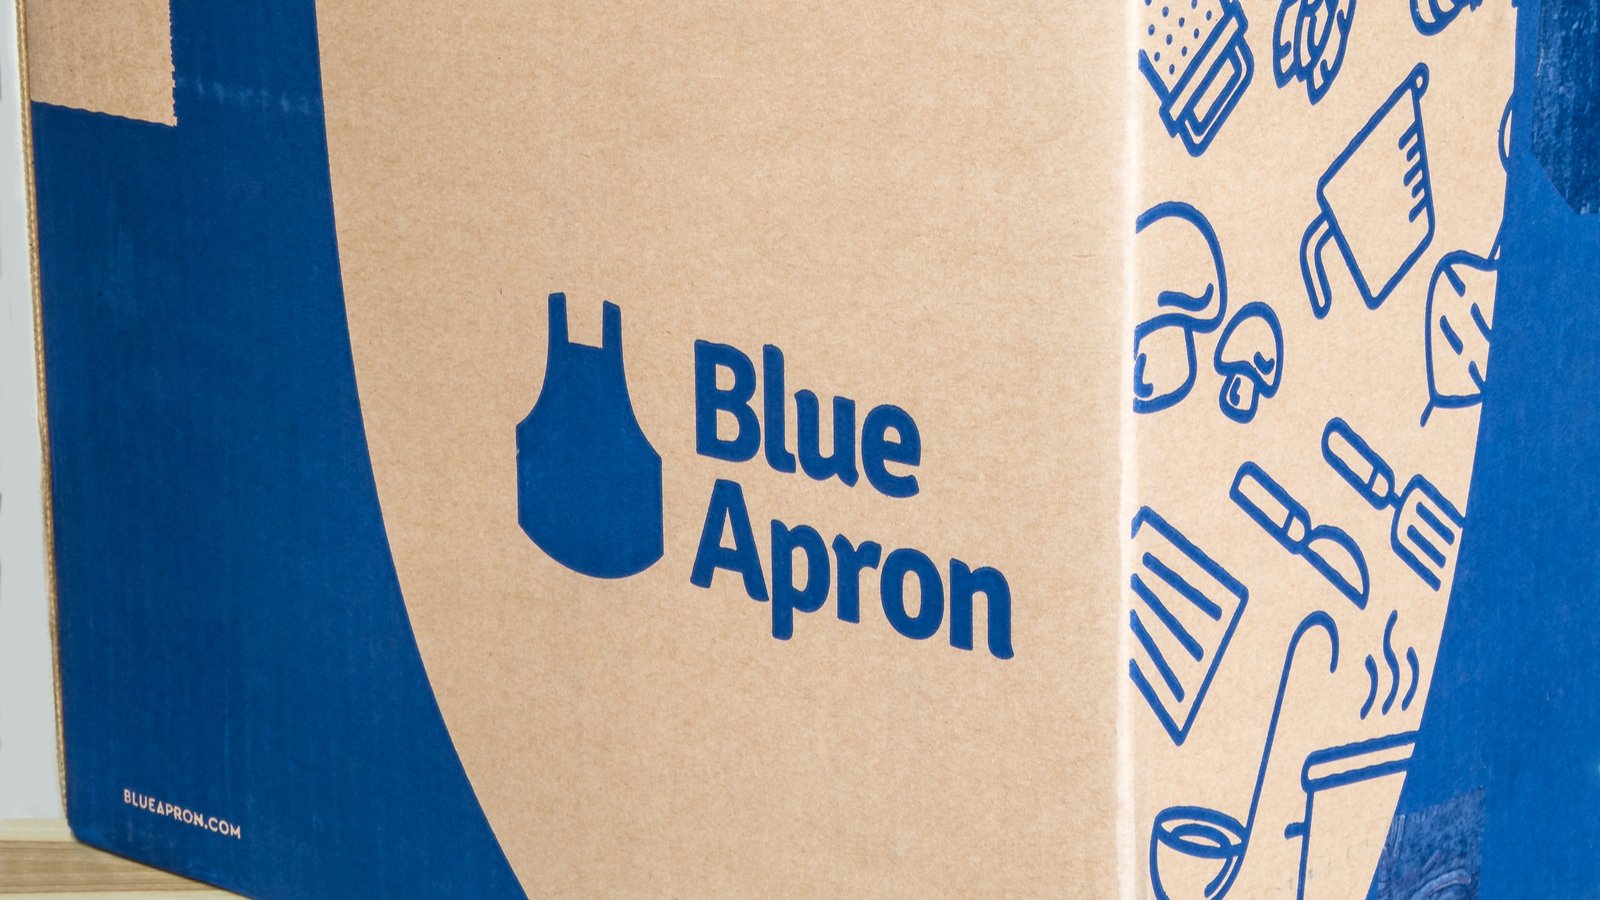 Image of the Blue Apron (APRN Stock) logo on one of the company's branded cardboard boxes used for its deliveries. It features several images of vegetables and kitchen tools on the side, next to the logo.